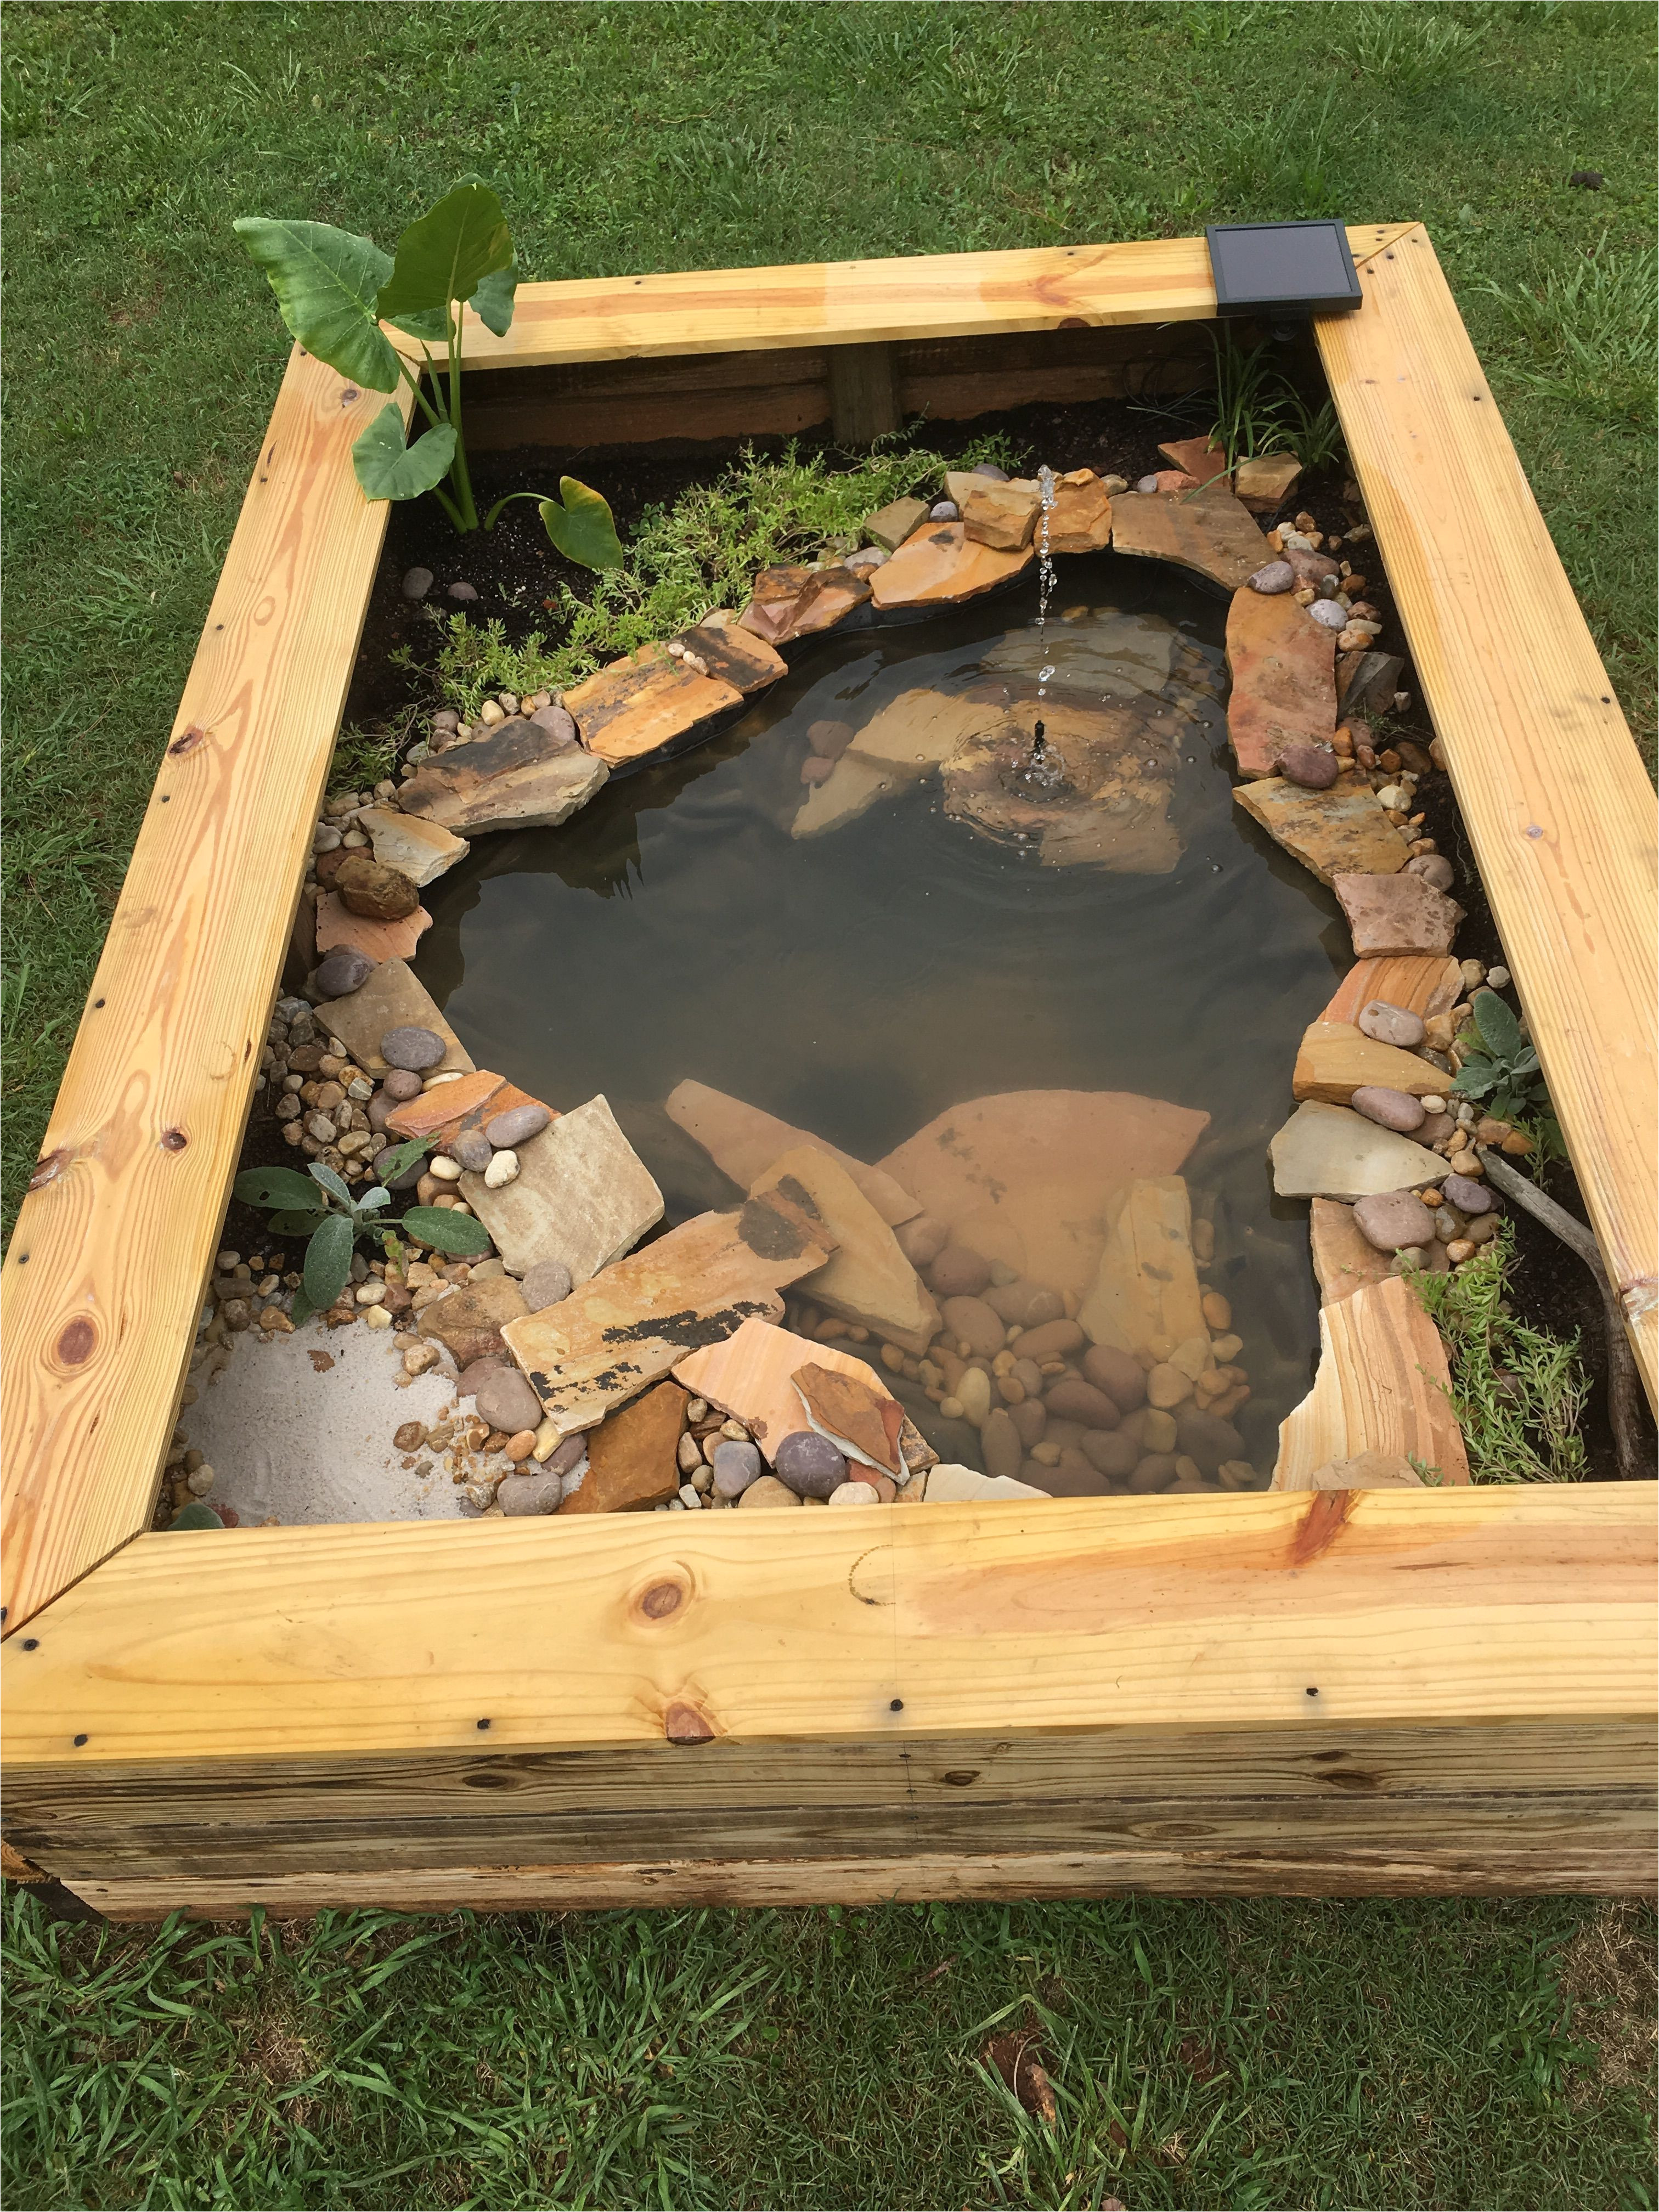 Above Ground Pond for Turtles Our New Diy Above Ground Pond for Bella the Turtle Projects to